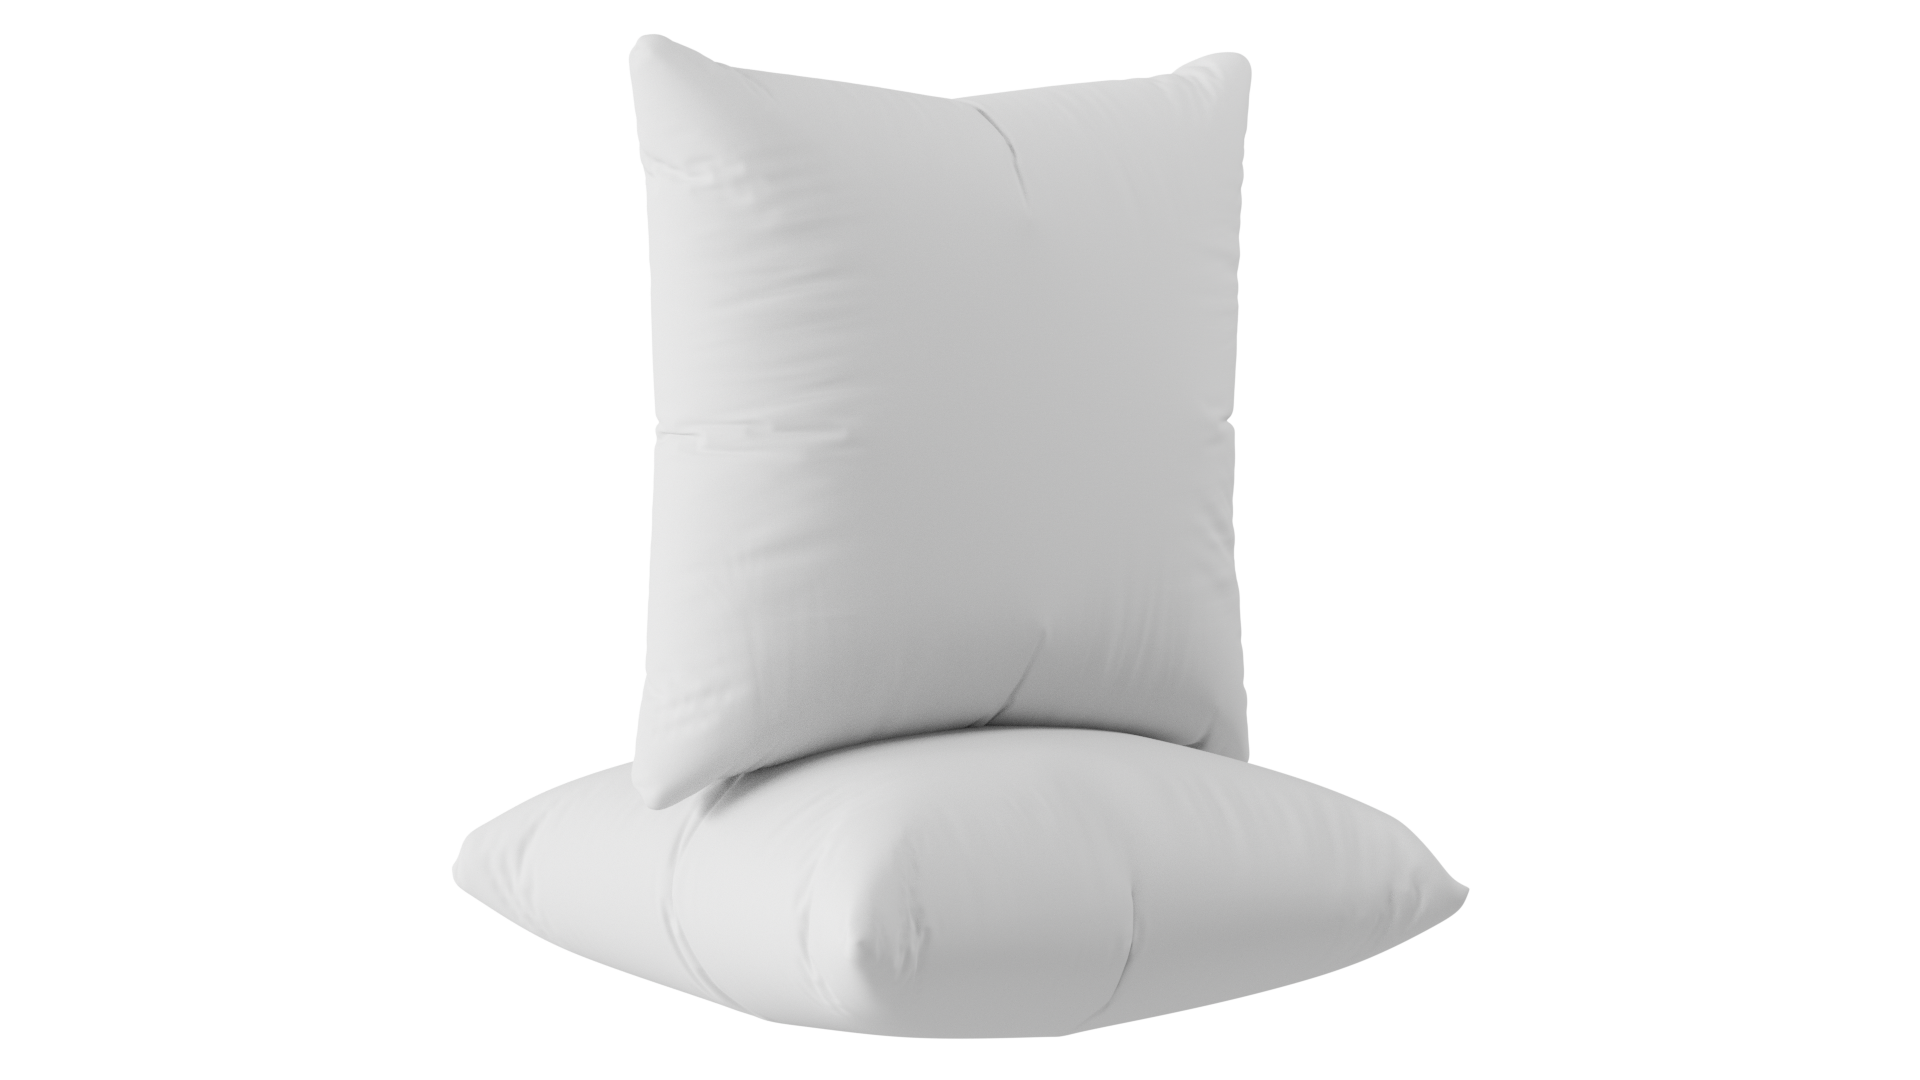 Utopia Bedding Throw Pillows Insert (Pack of 2, White) - 26 x 26 Inches Bed  and Couch Pillows - Indoor Decorative Pillows